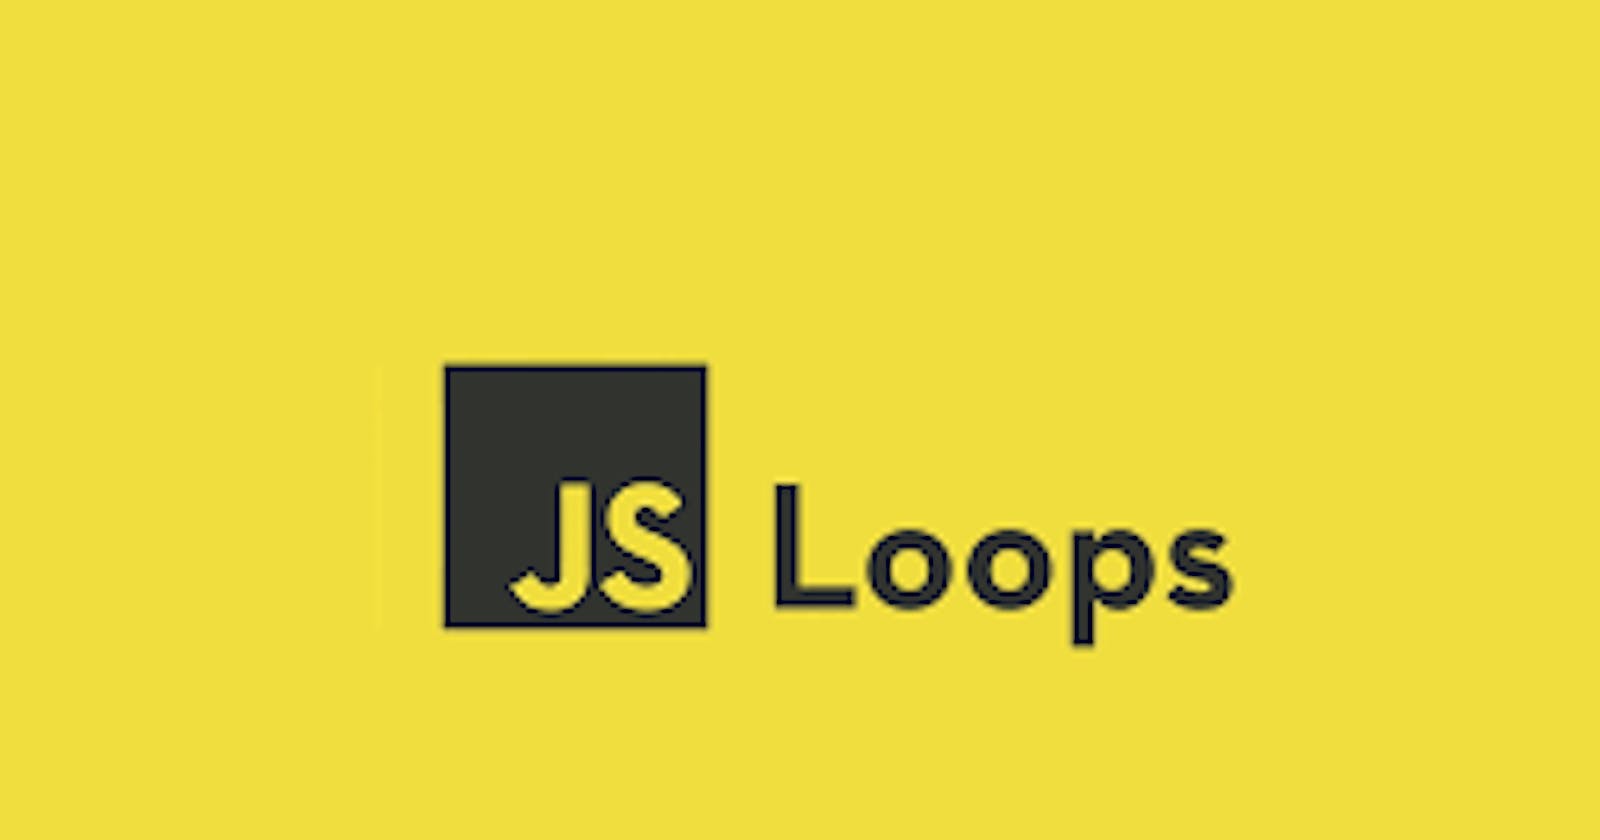 Master the different loops in Javascript